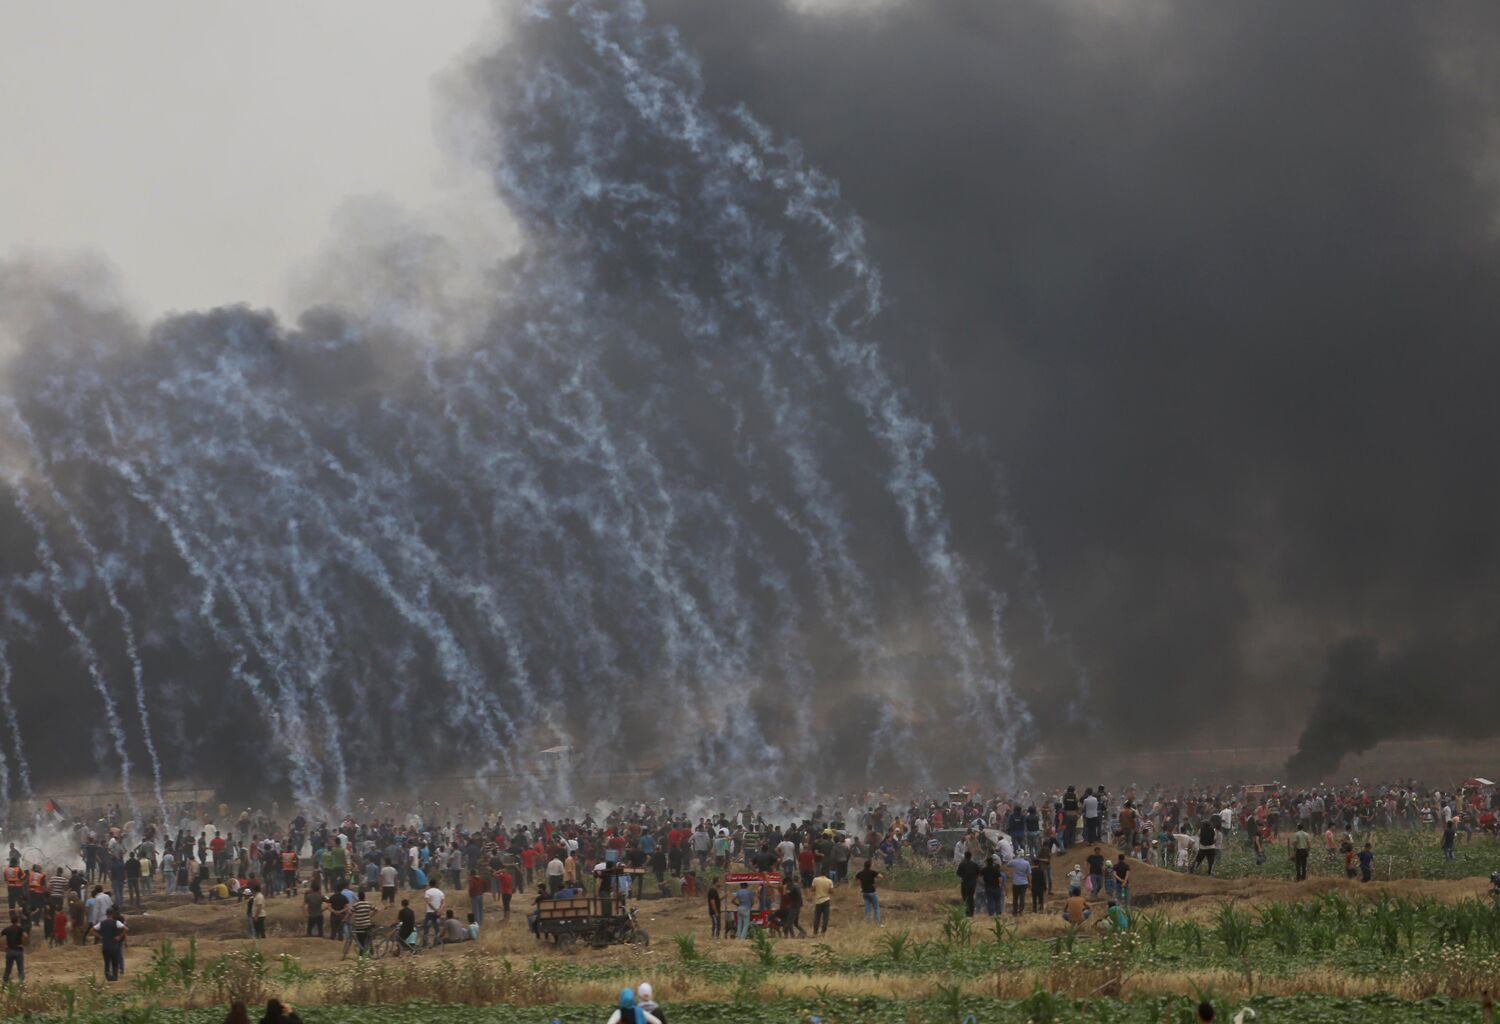 Israel showers Palestinians Tear gas May 4 2018